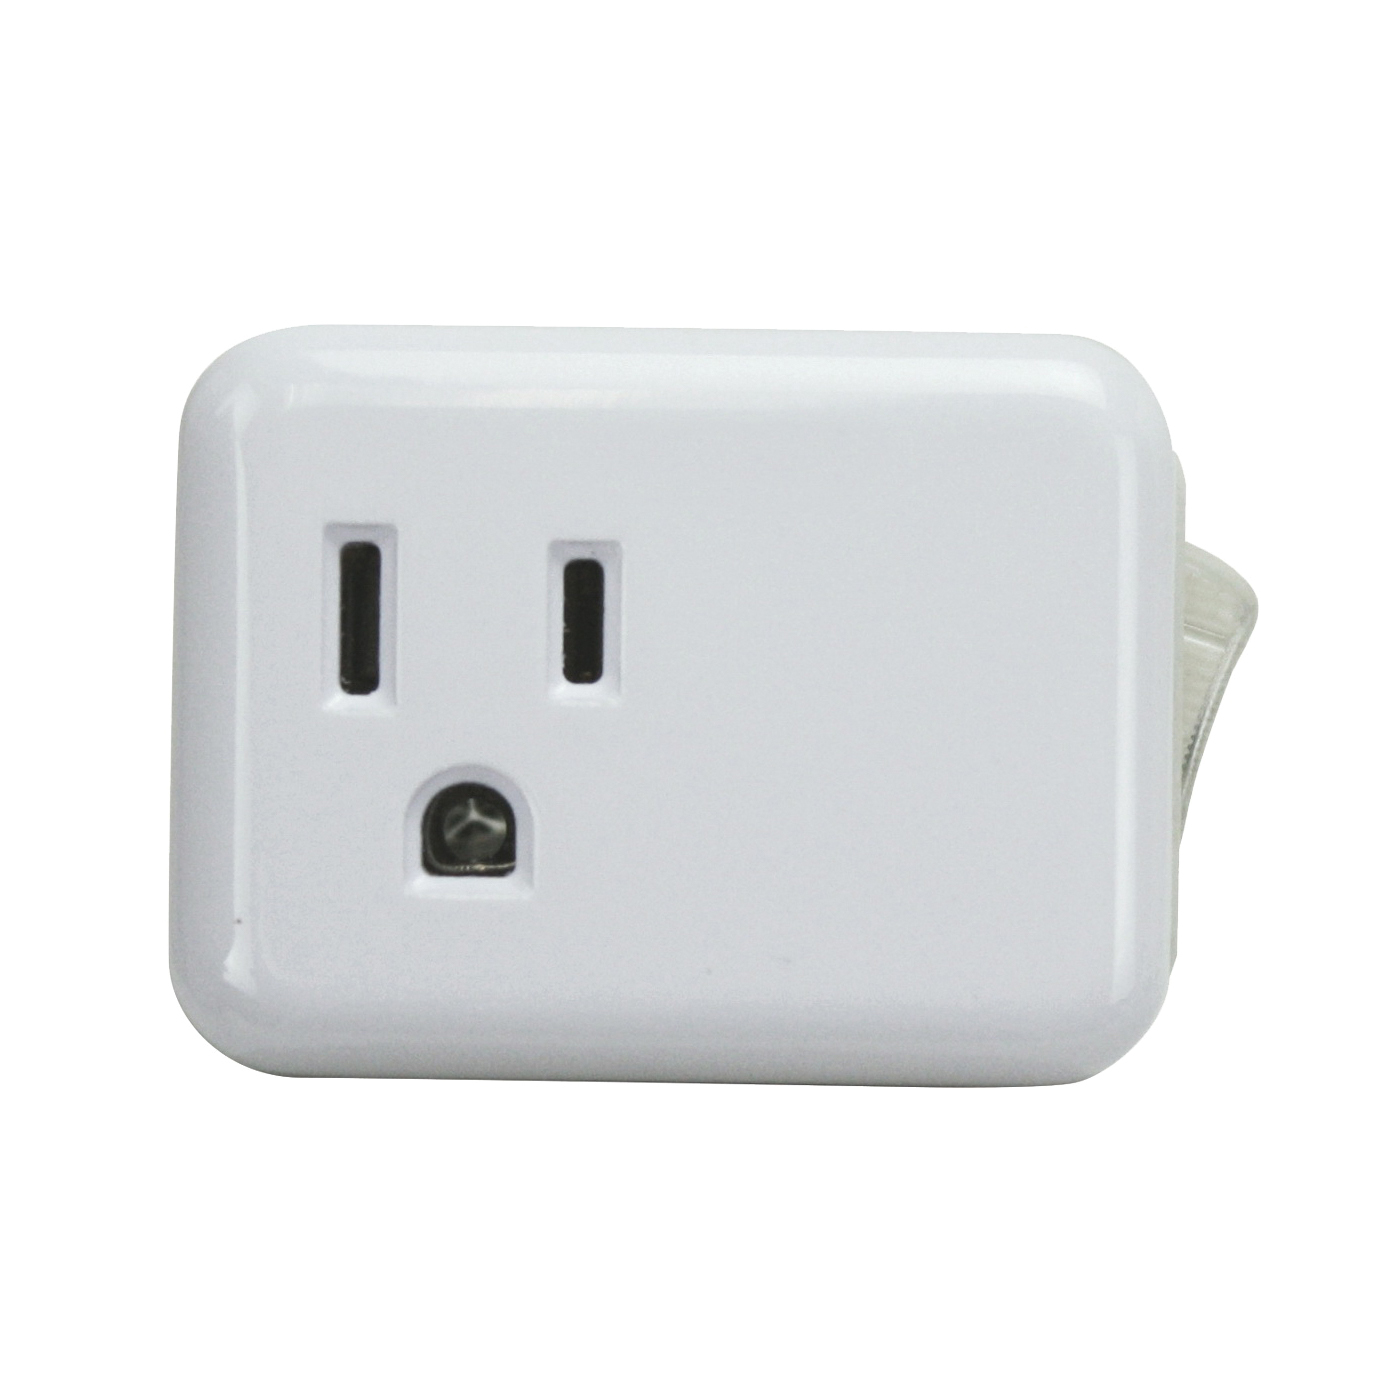 ORES001 Outlet Tap with On Off Switch, 1-Outlet, White